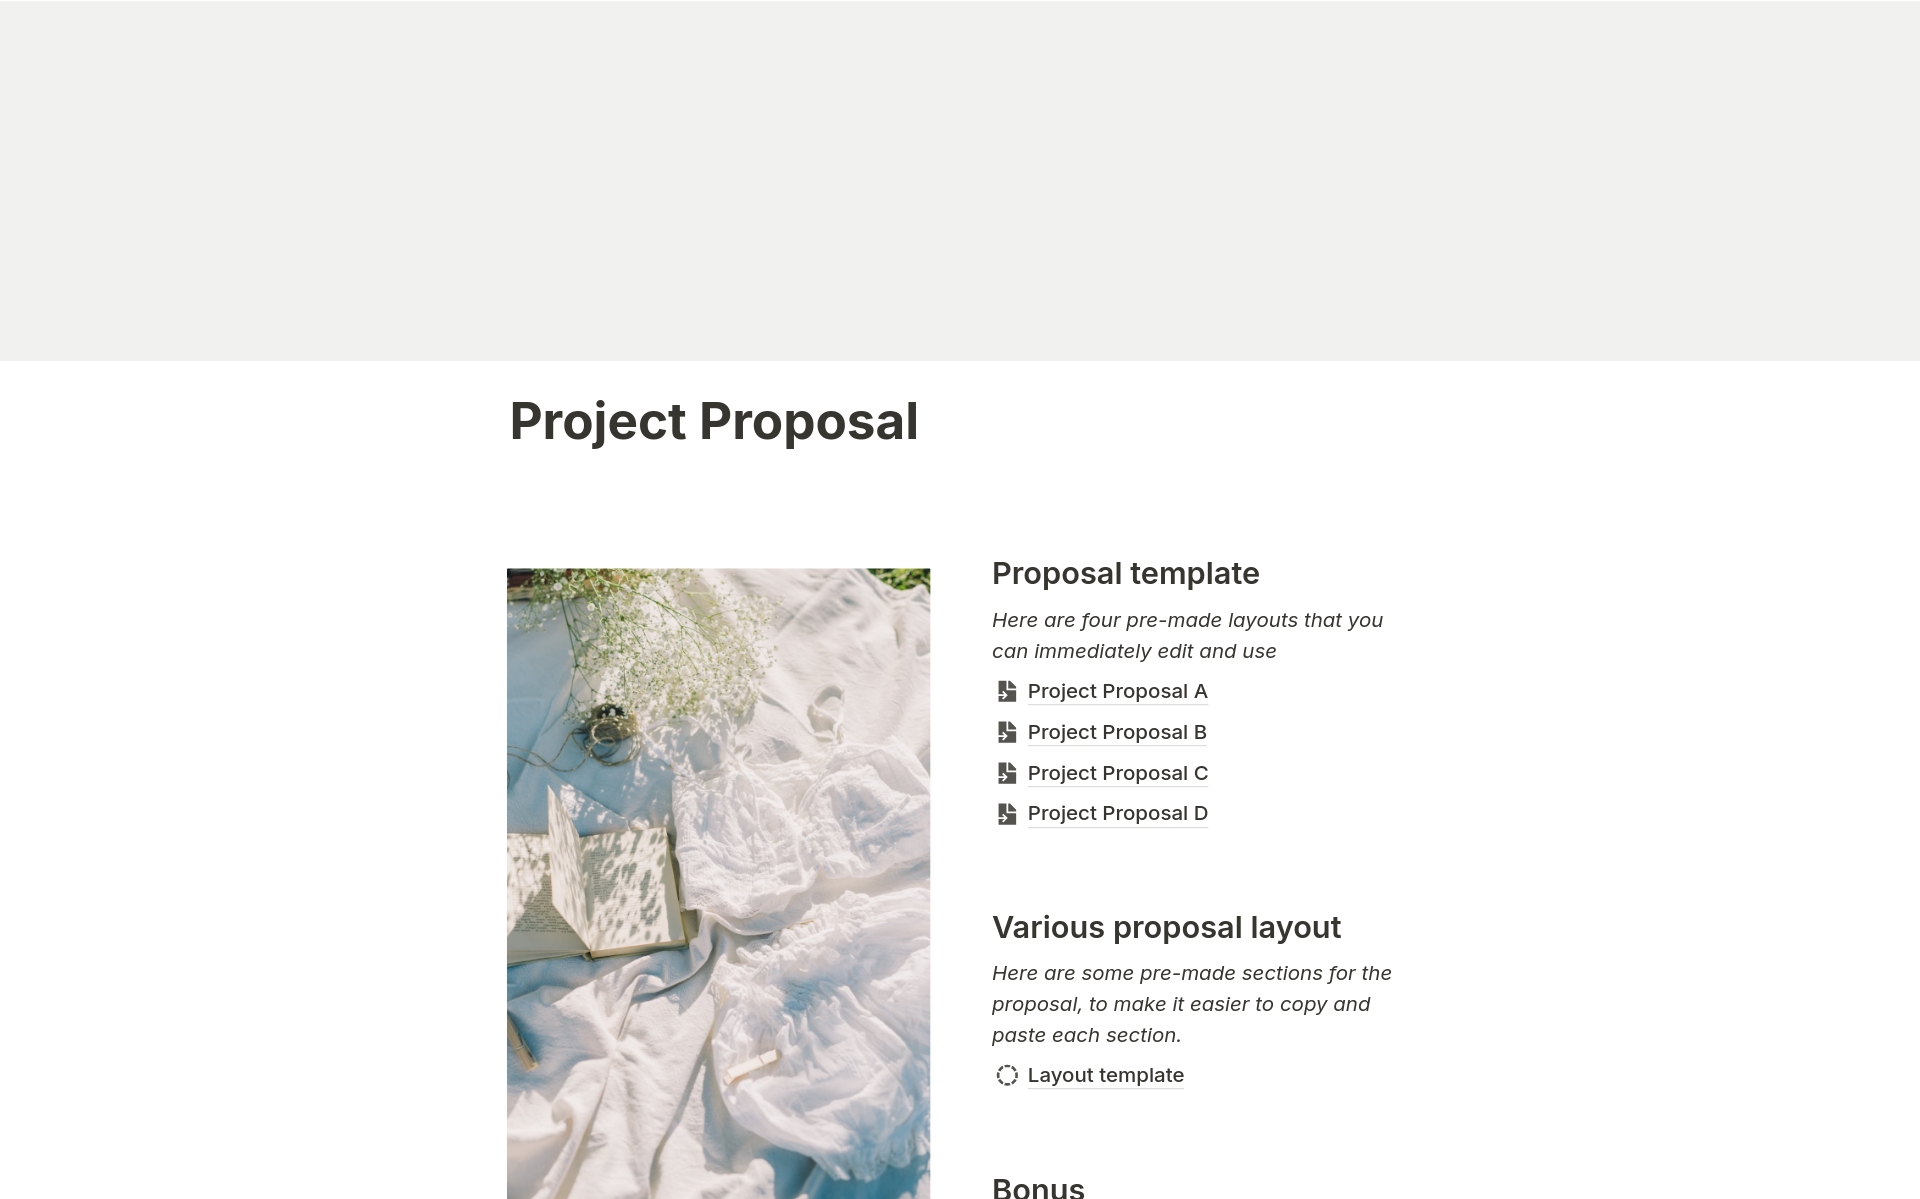 A proposal template made to help you win business, showcase your skills and work with clients.